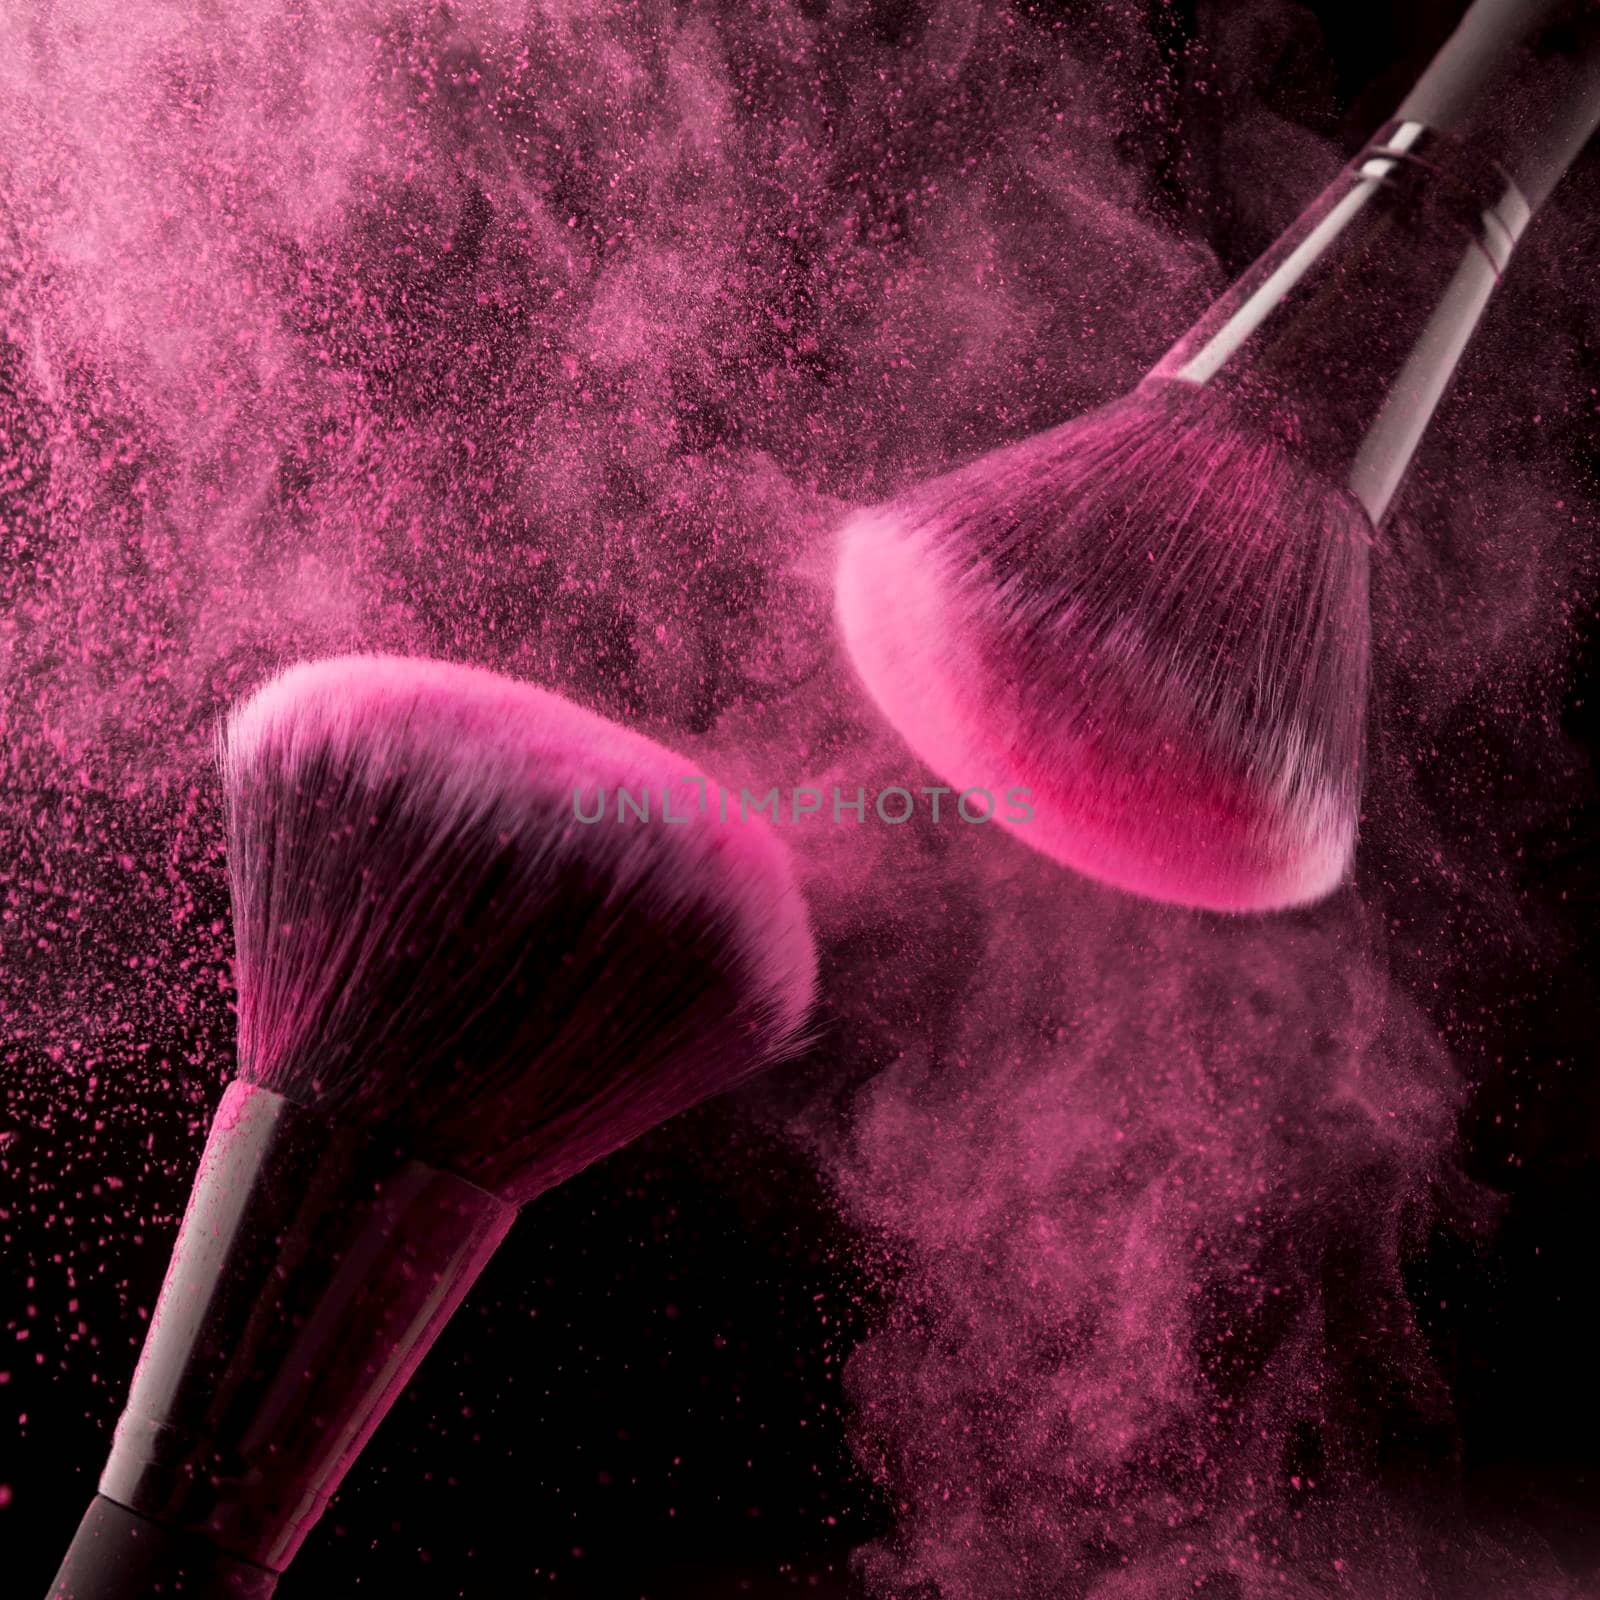 two cosmetic brushes pink powder dark background. High quality photo by Zahard